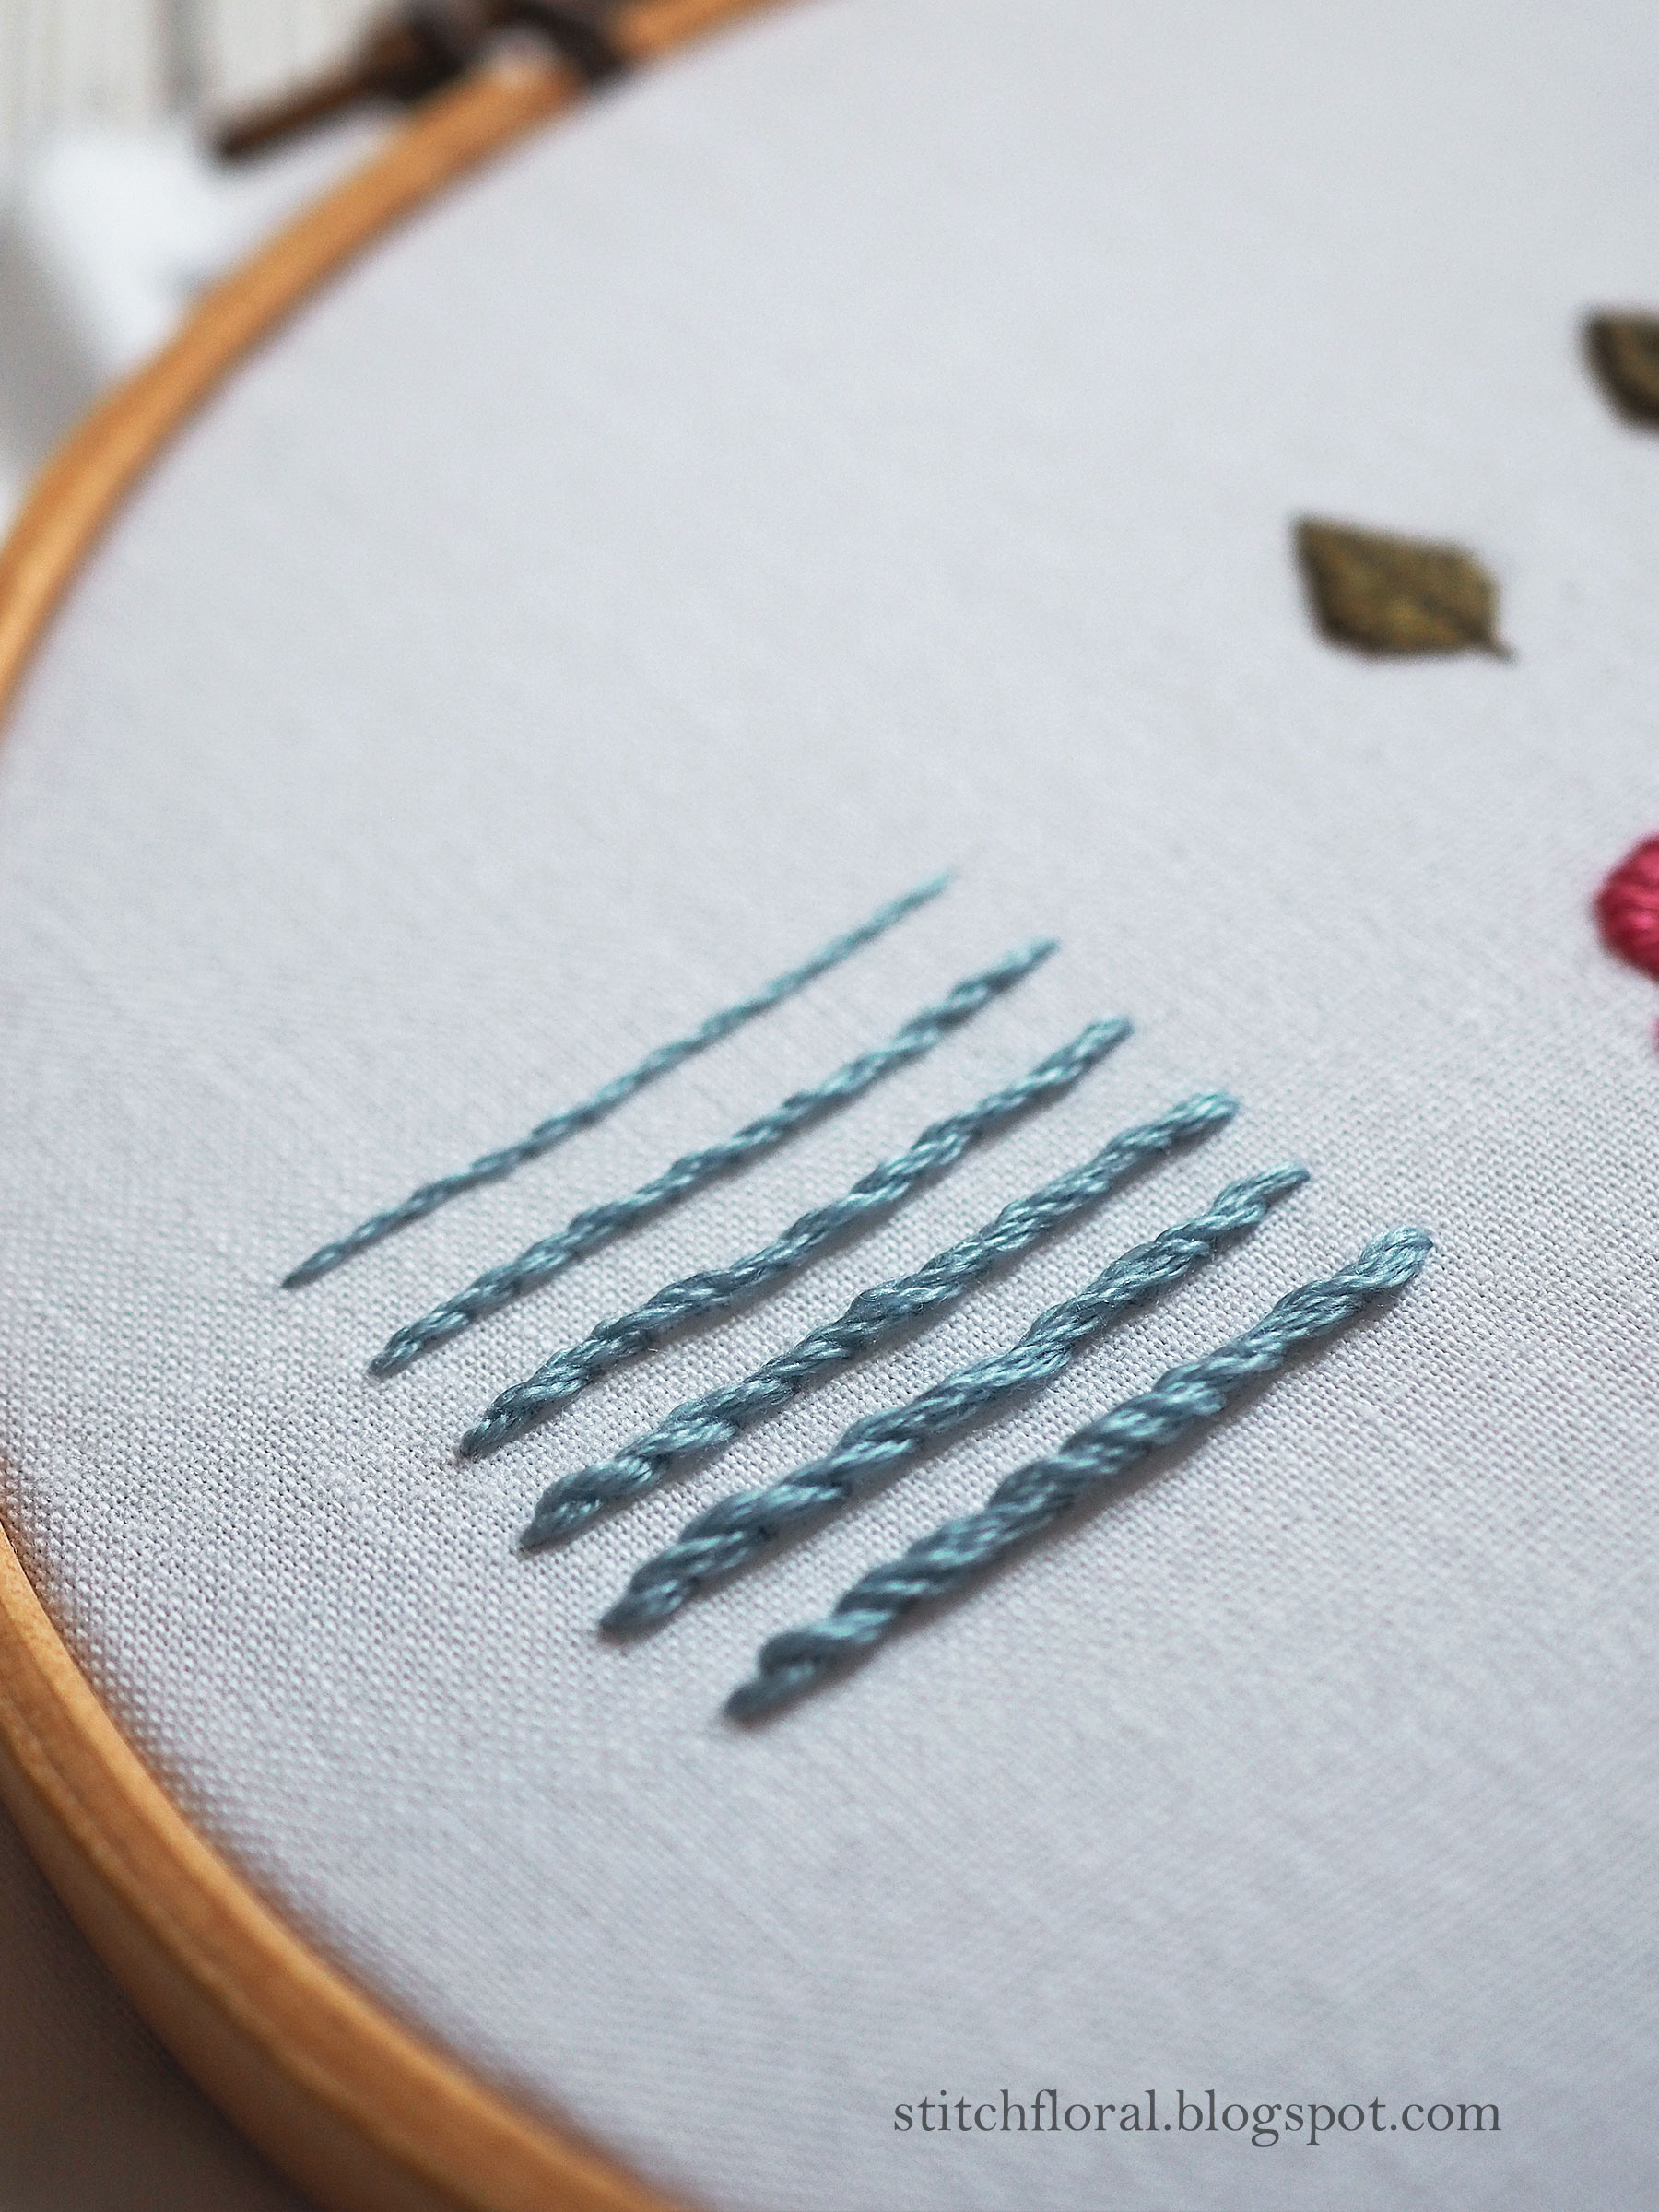 how-many-strands-of-thread-to-use-in-embroidery-stitch-floral